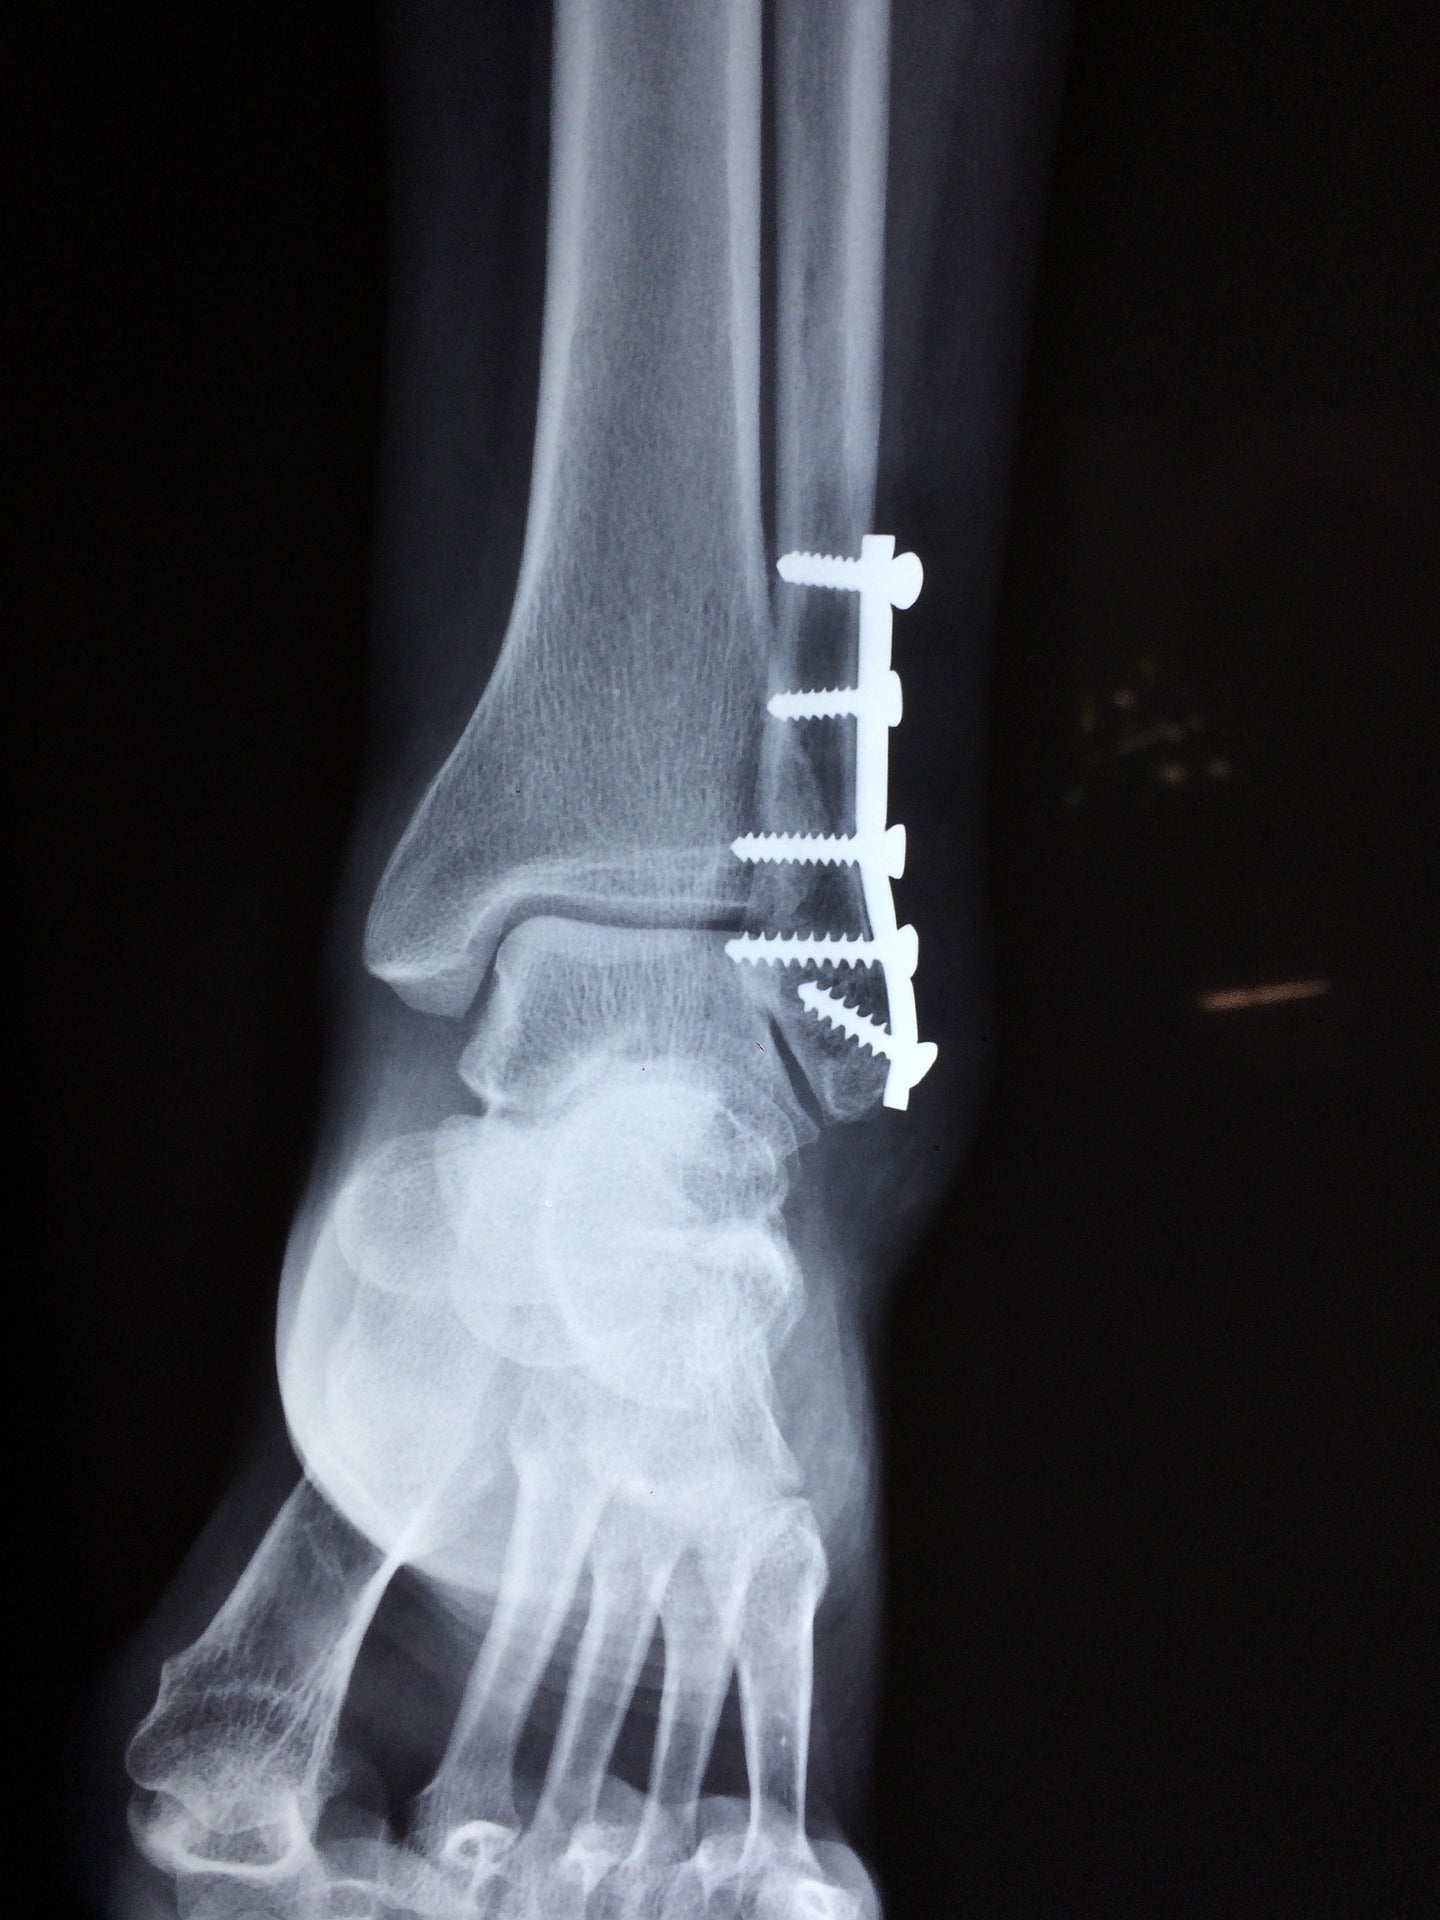 An image of a fractured ankle.